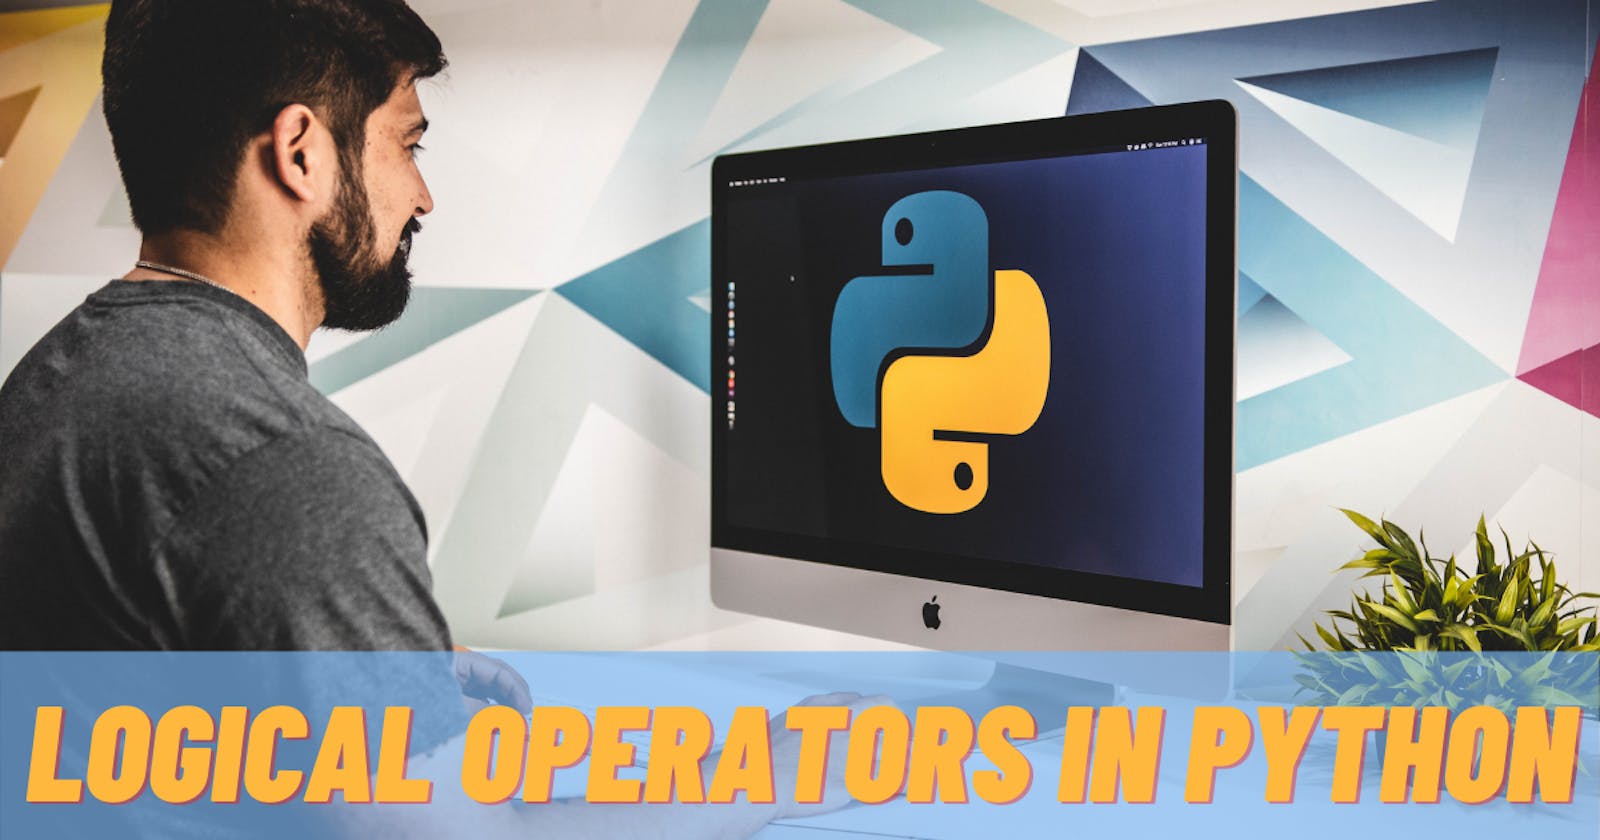 Logical Operators in Python